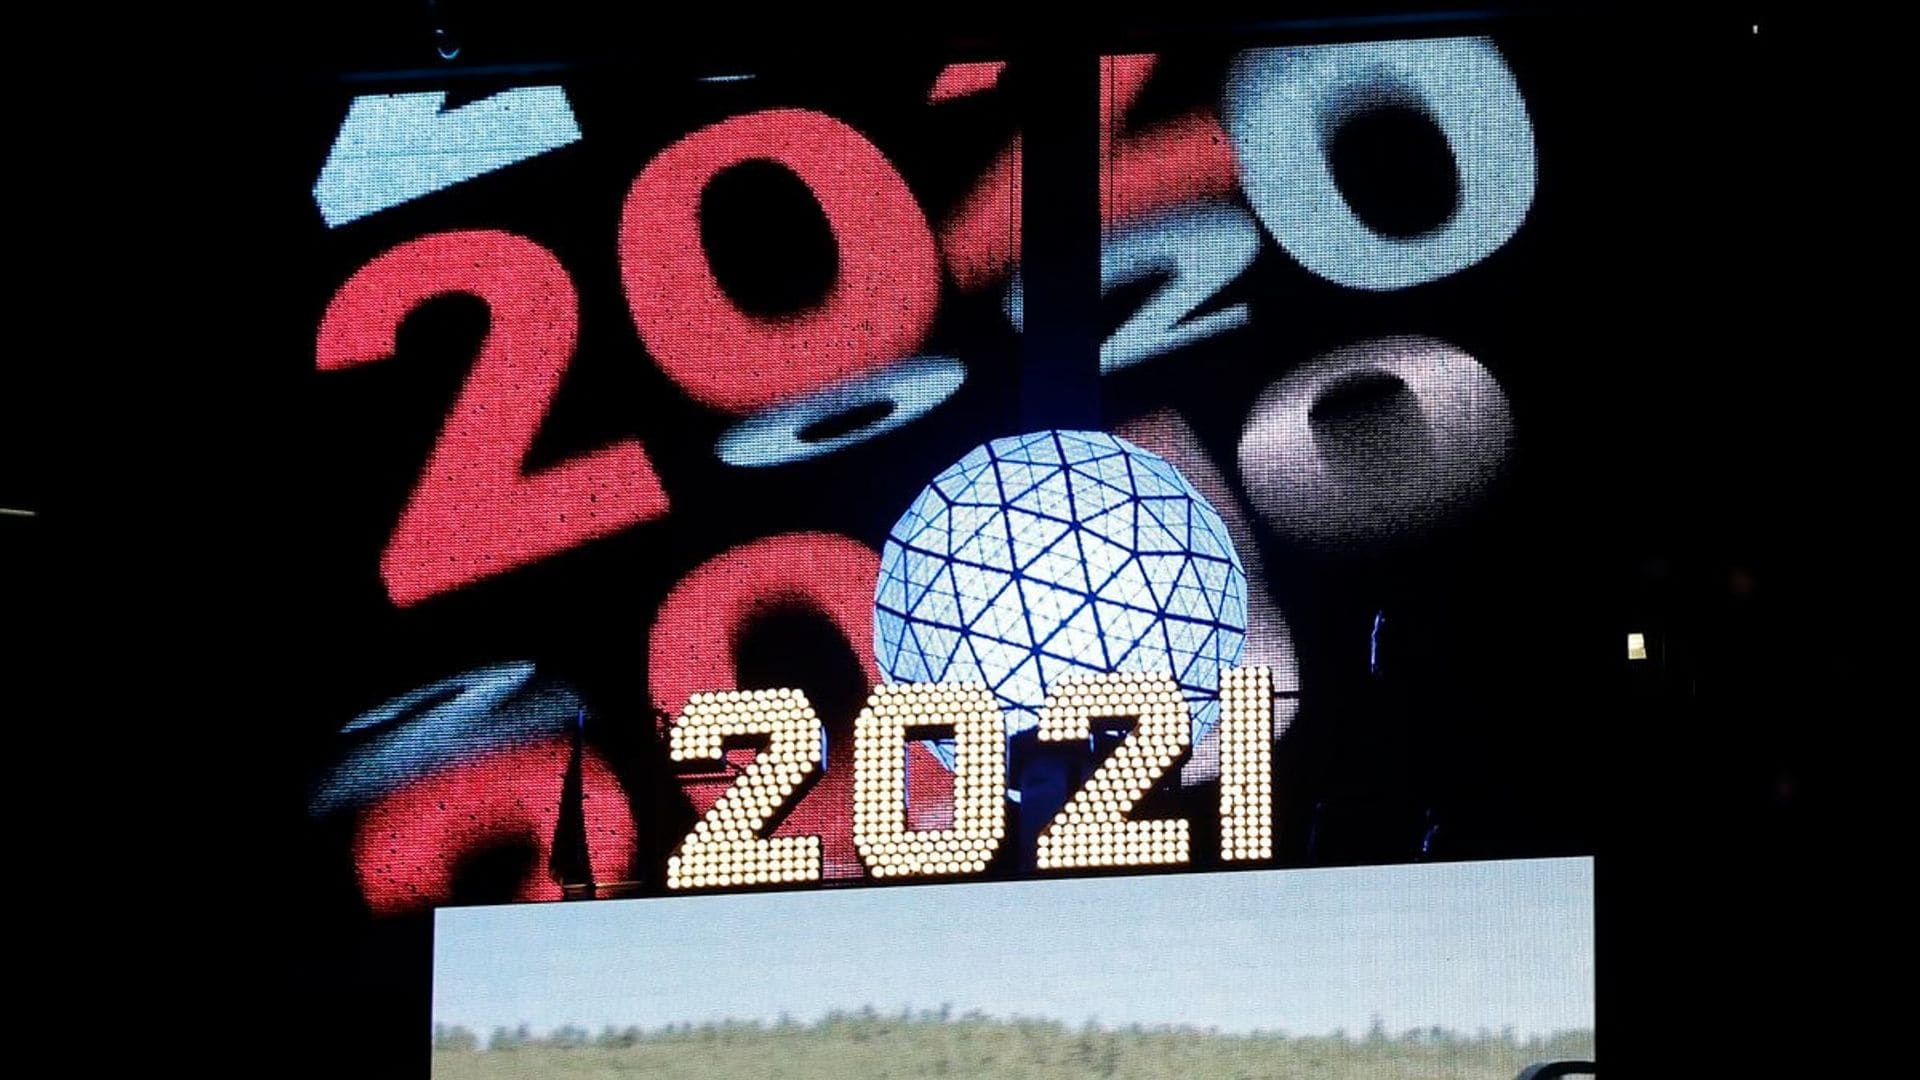 2021 Times Square New Year's Eve Celebration